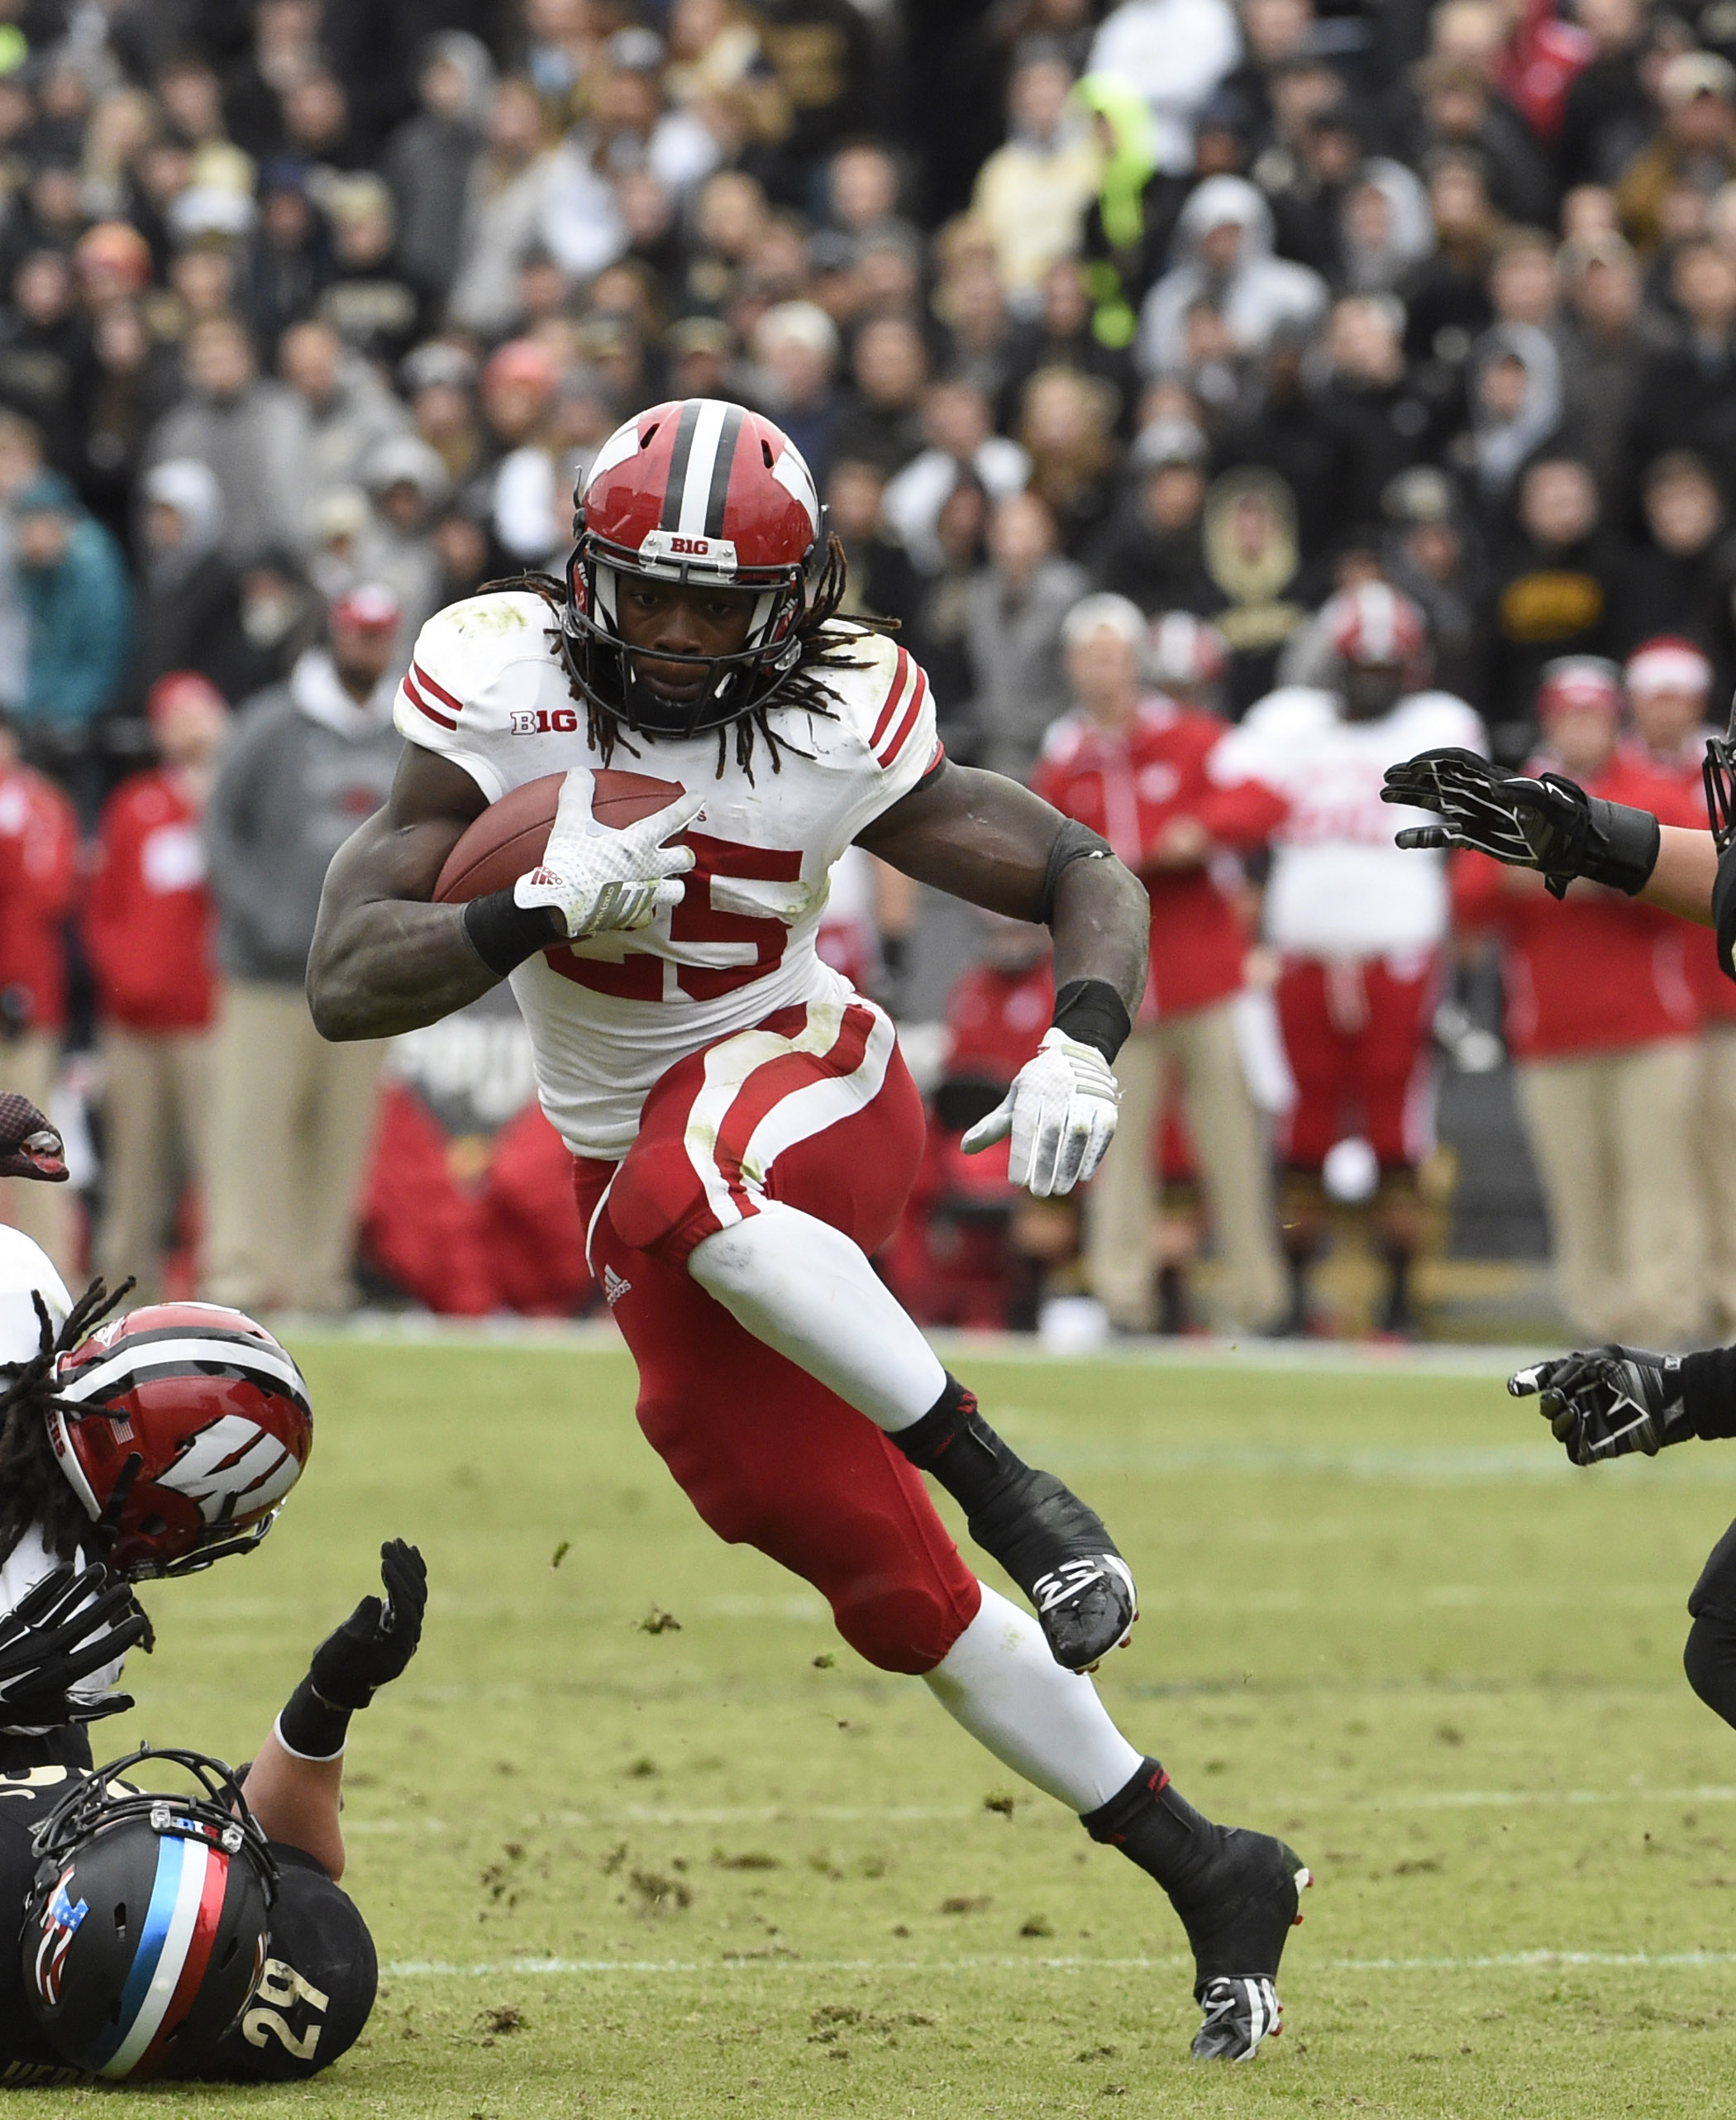 Wisconsin's Melvin Gordon continues to sprint past Big Ten competition. (USAT)